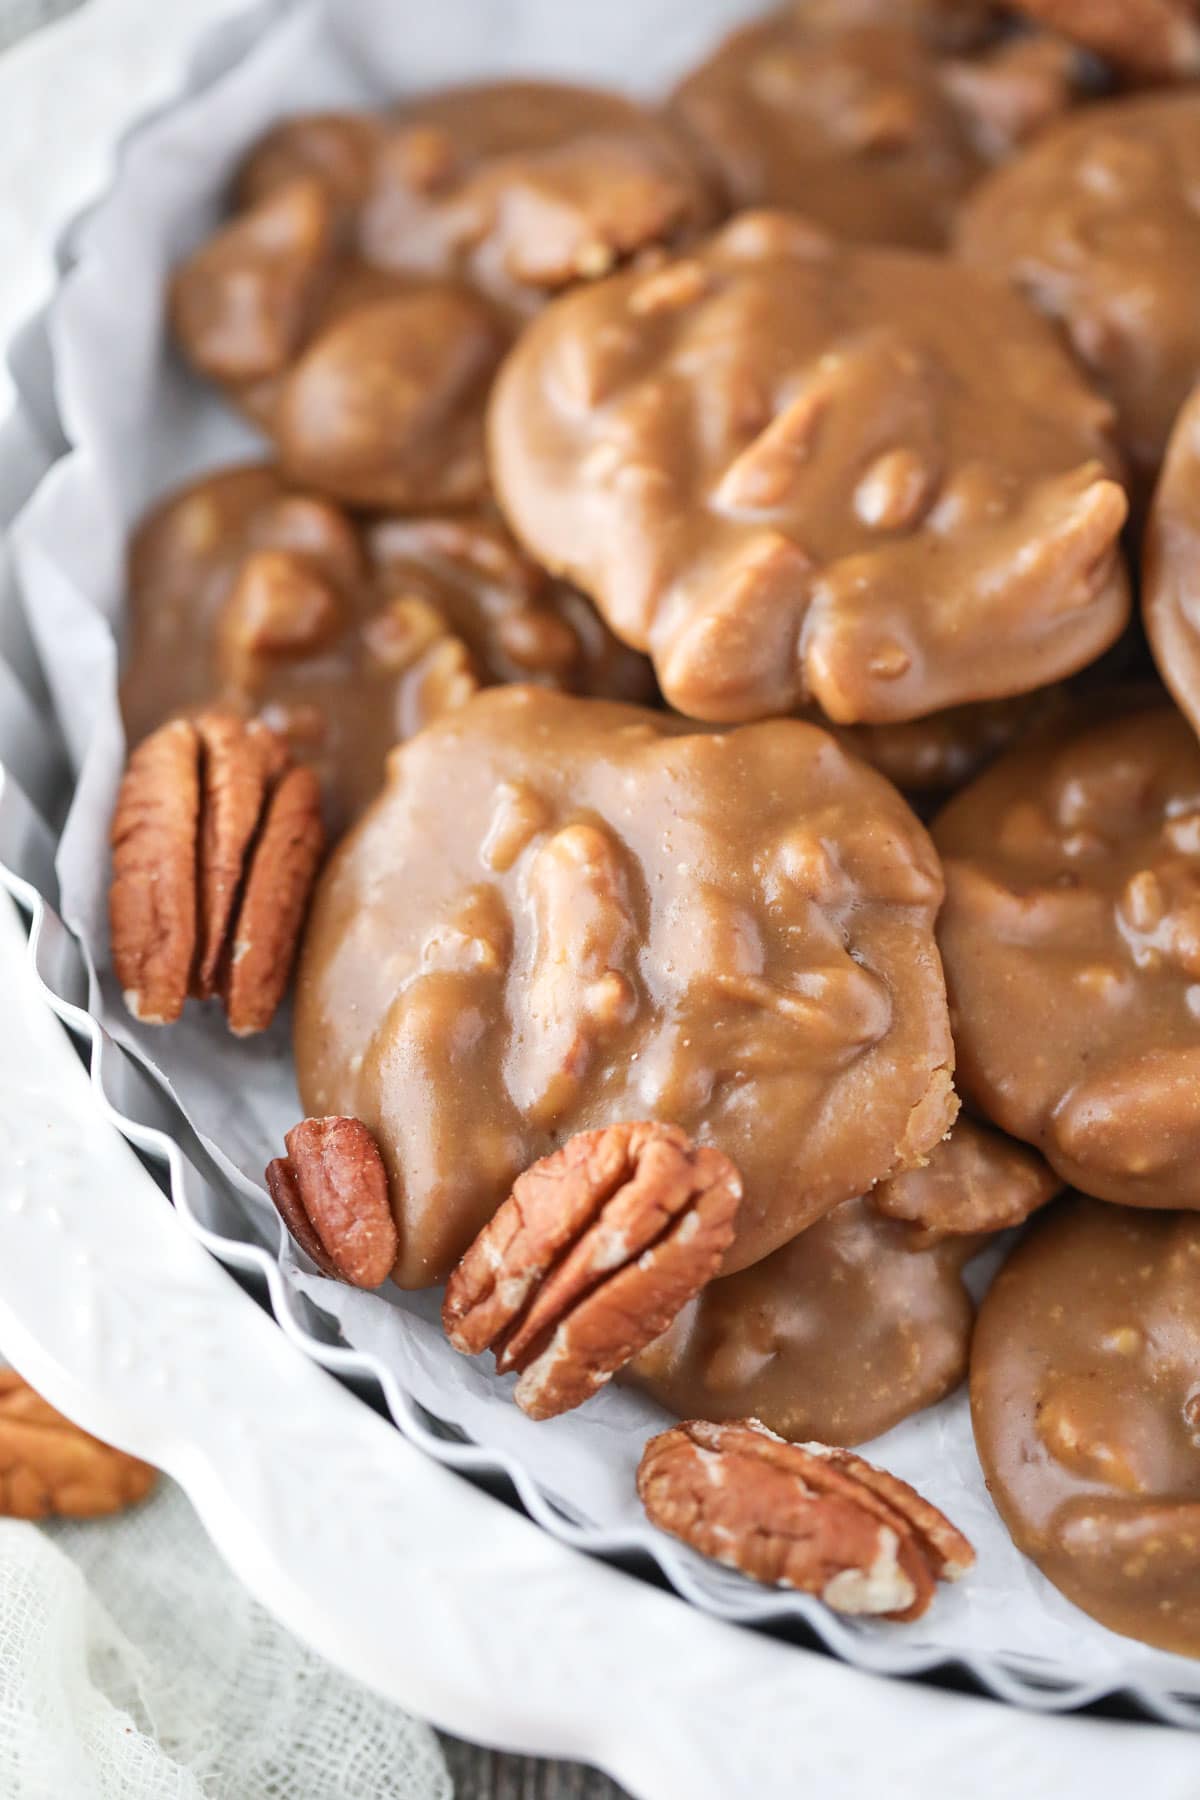 southern pecan pralines on a plate.